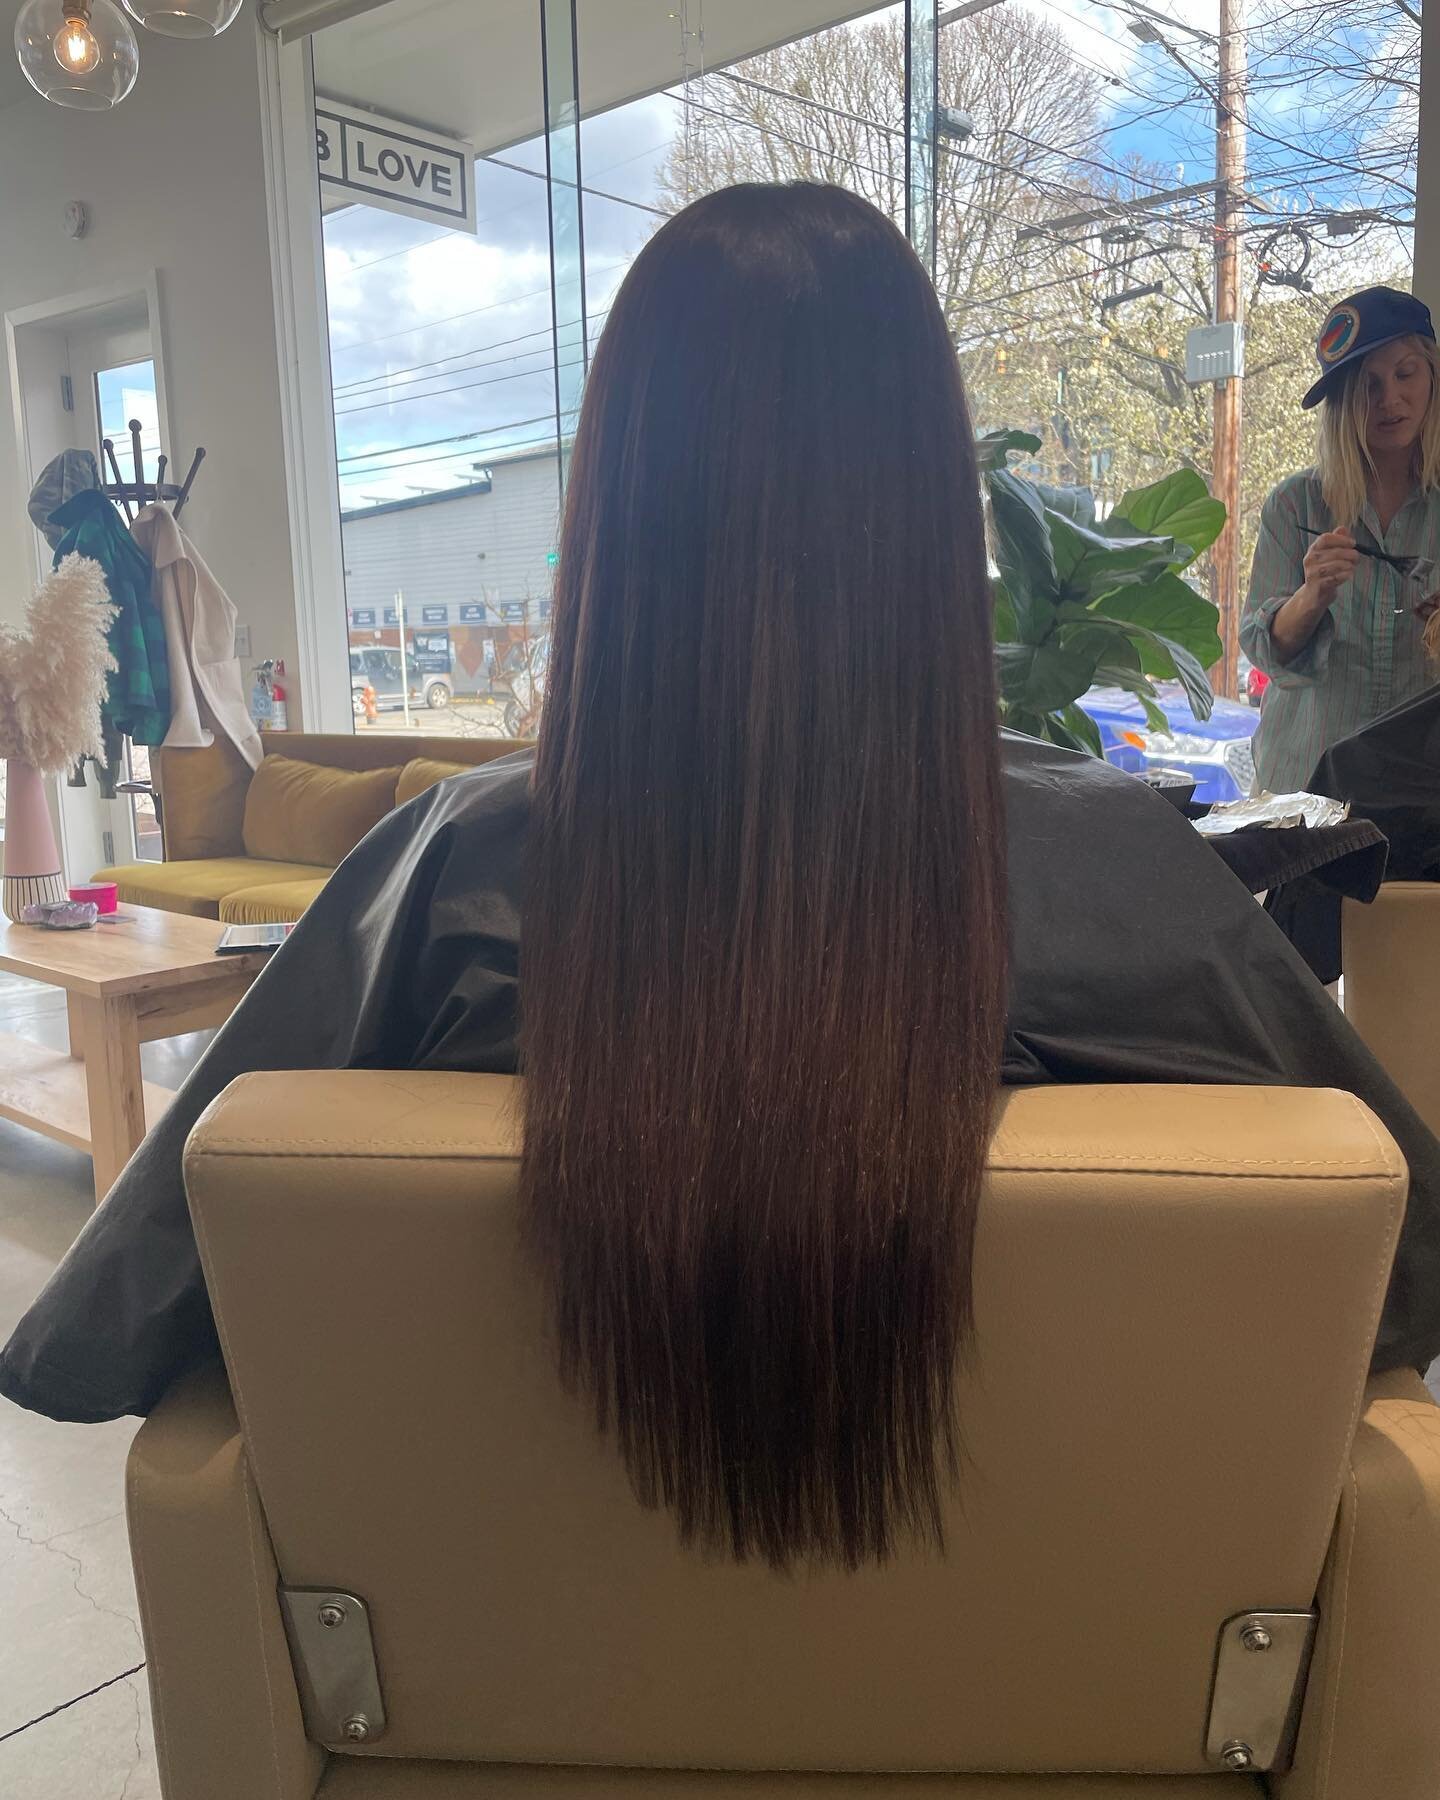 Lovely Tuesday #pdxhairdresser #pdxhairextensions #pdxhairextensionspecialist #longhair #darkbrownhair #portlandhairstylist #portlandhairextensions #portlandhairdresse #nwsalon #portlandhairstylist #remyhairextensions #individualhairextensions #portl